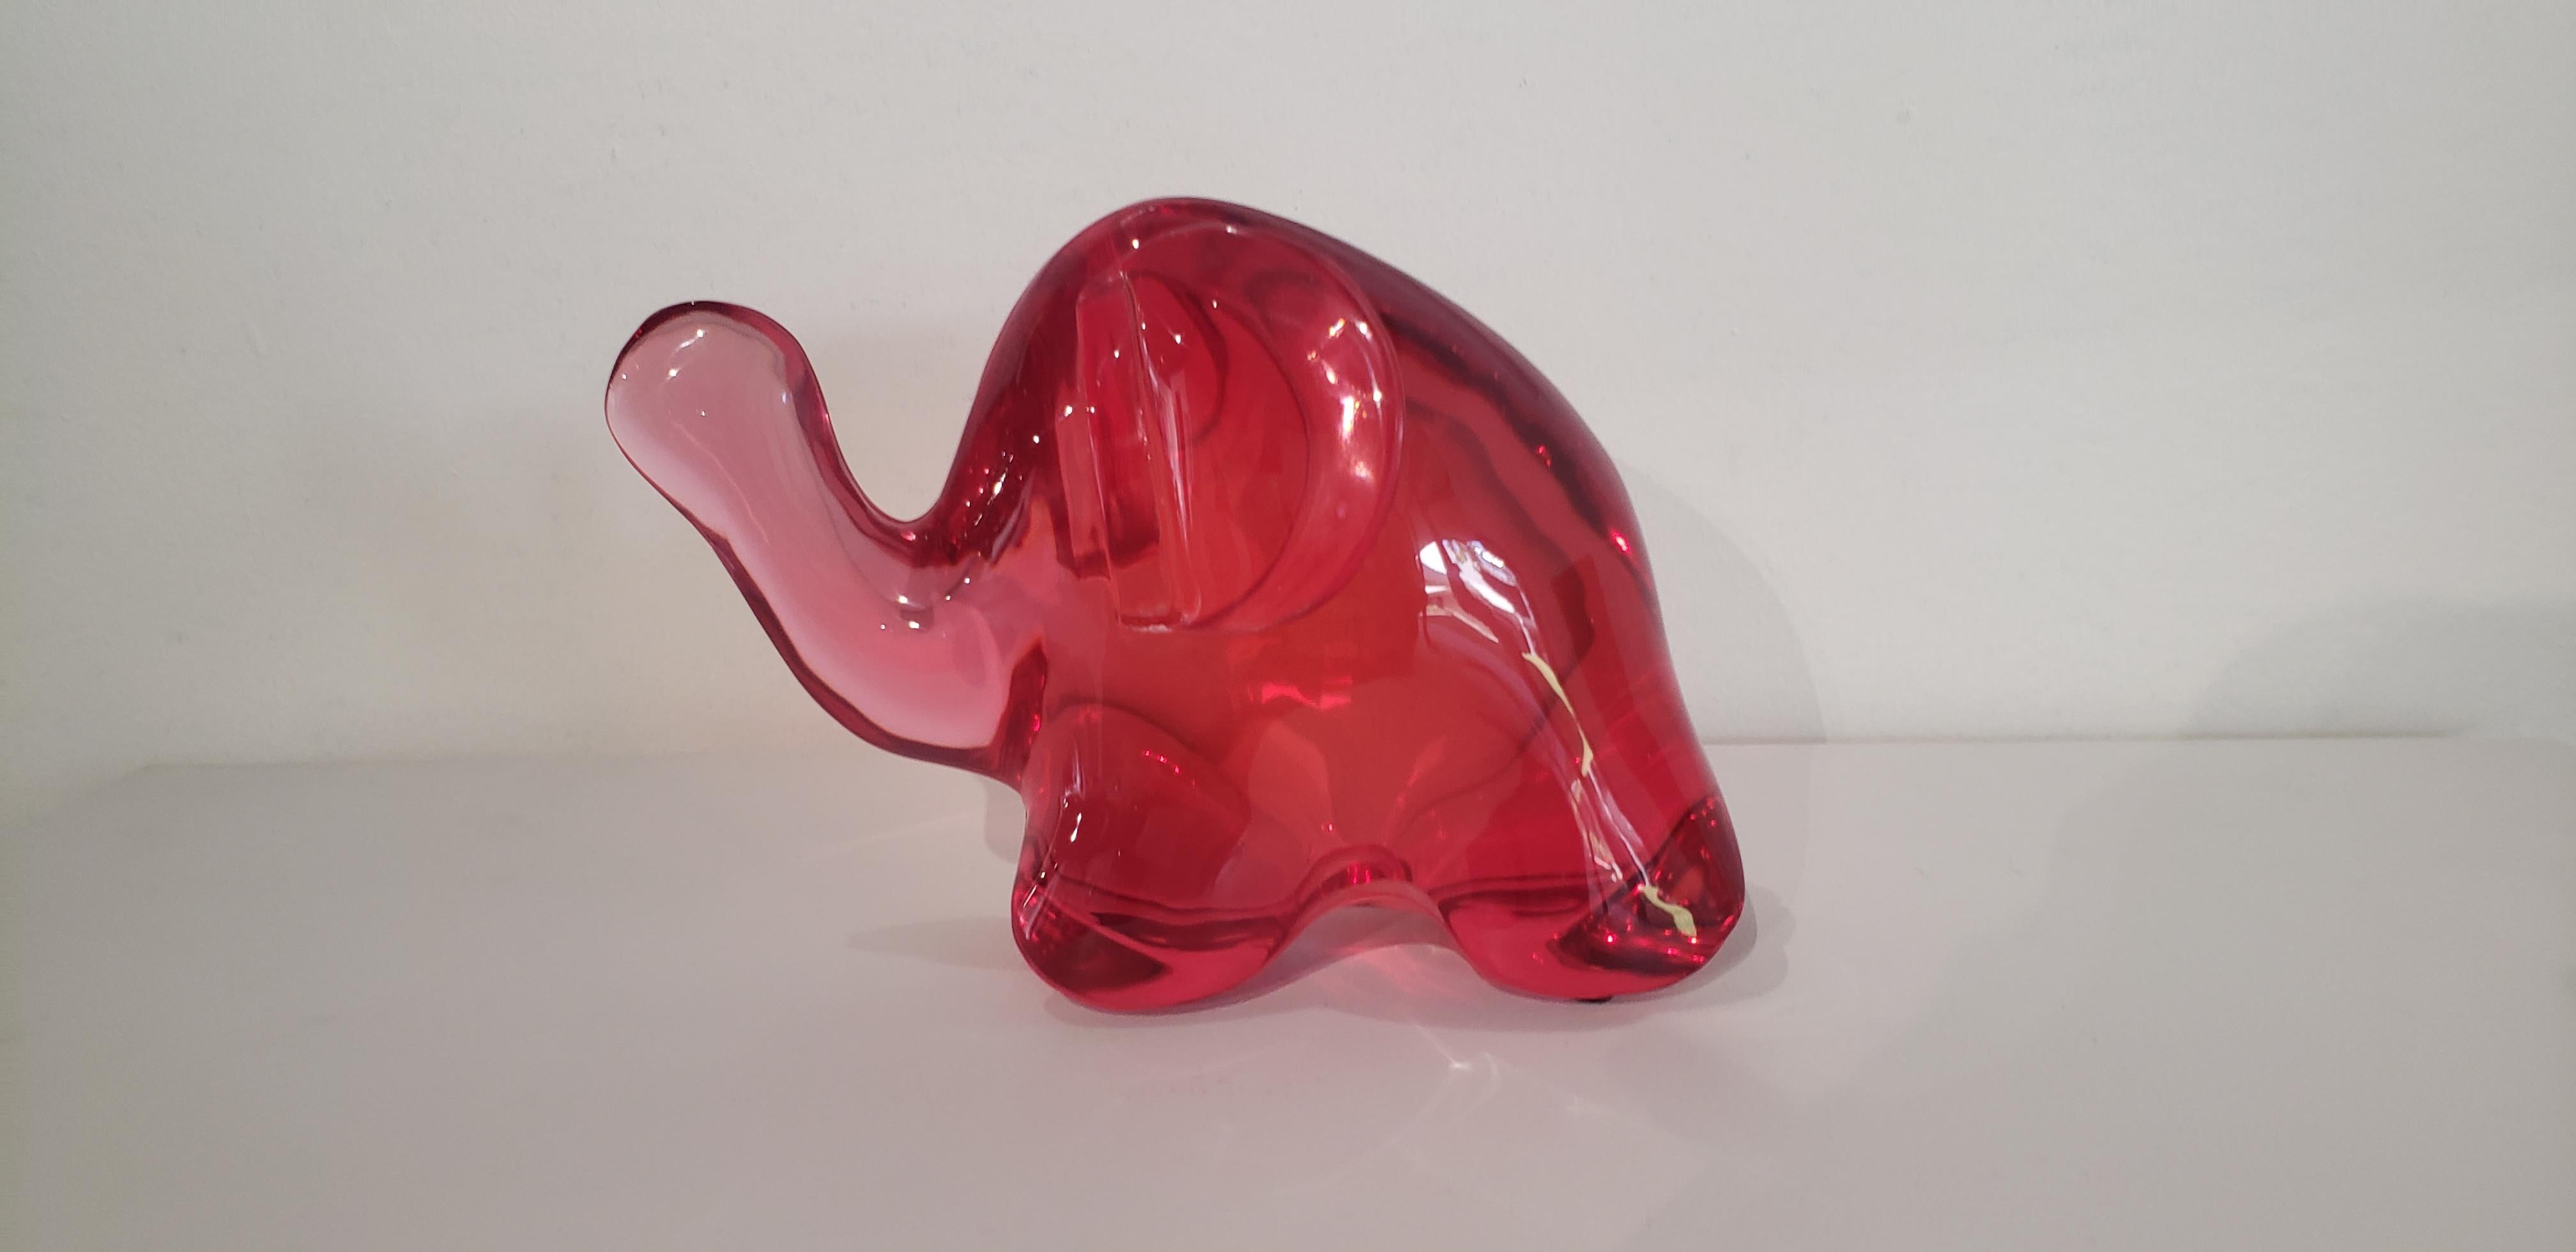 Christopher Schulz Figurative Sculpture - Luck Elephant Berry Red (Small)